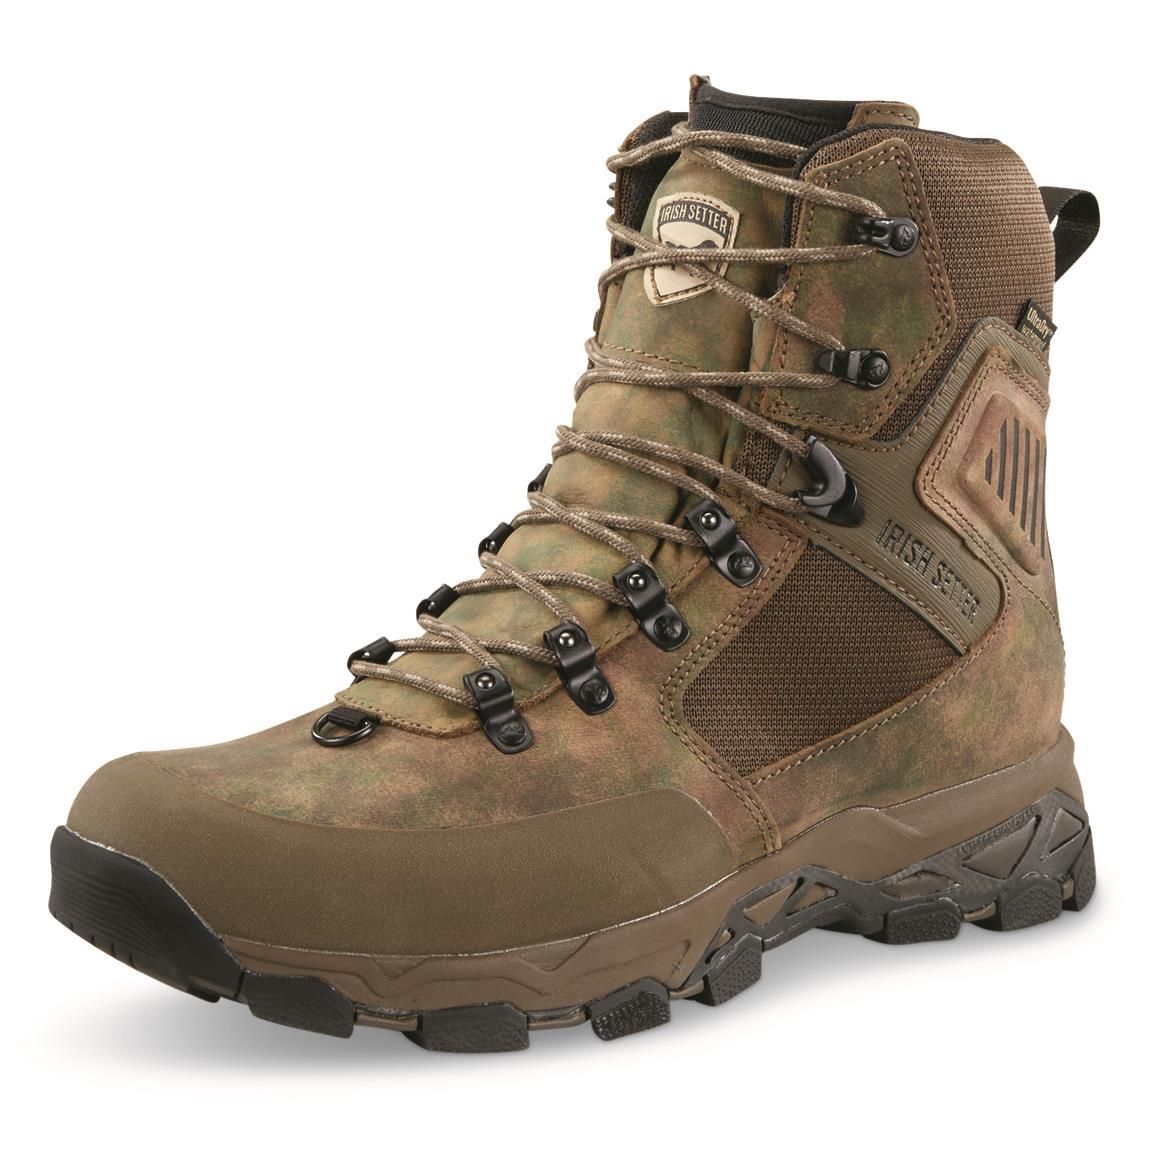 Guide Gear Monolithic Extreme Waterproof Insulated Hunting Boots, 2,400 ...